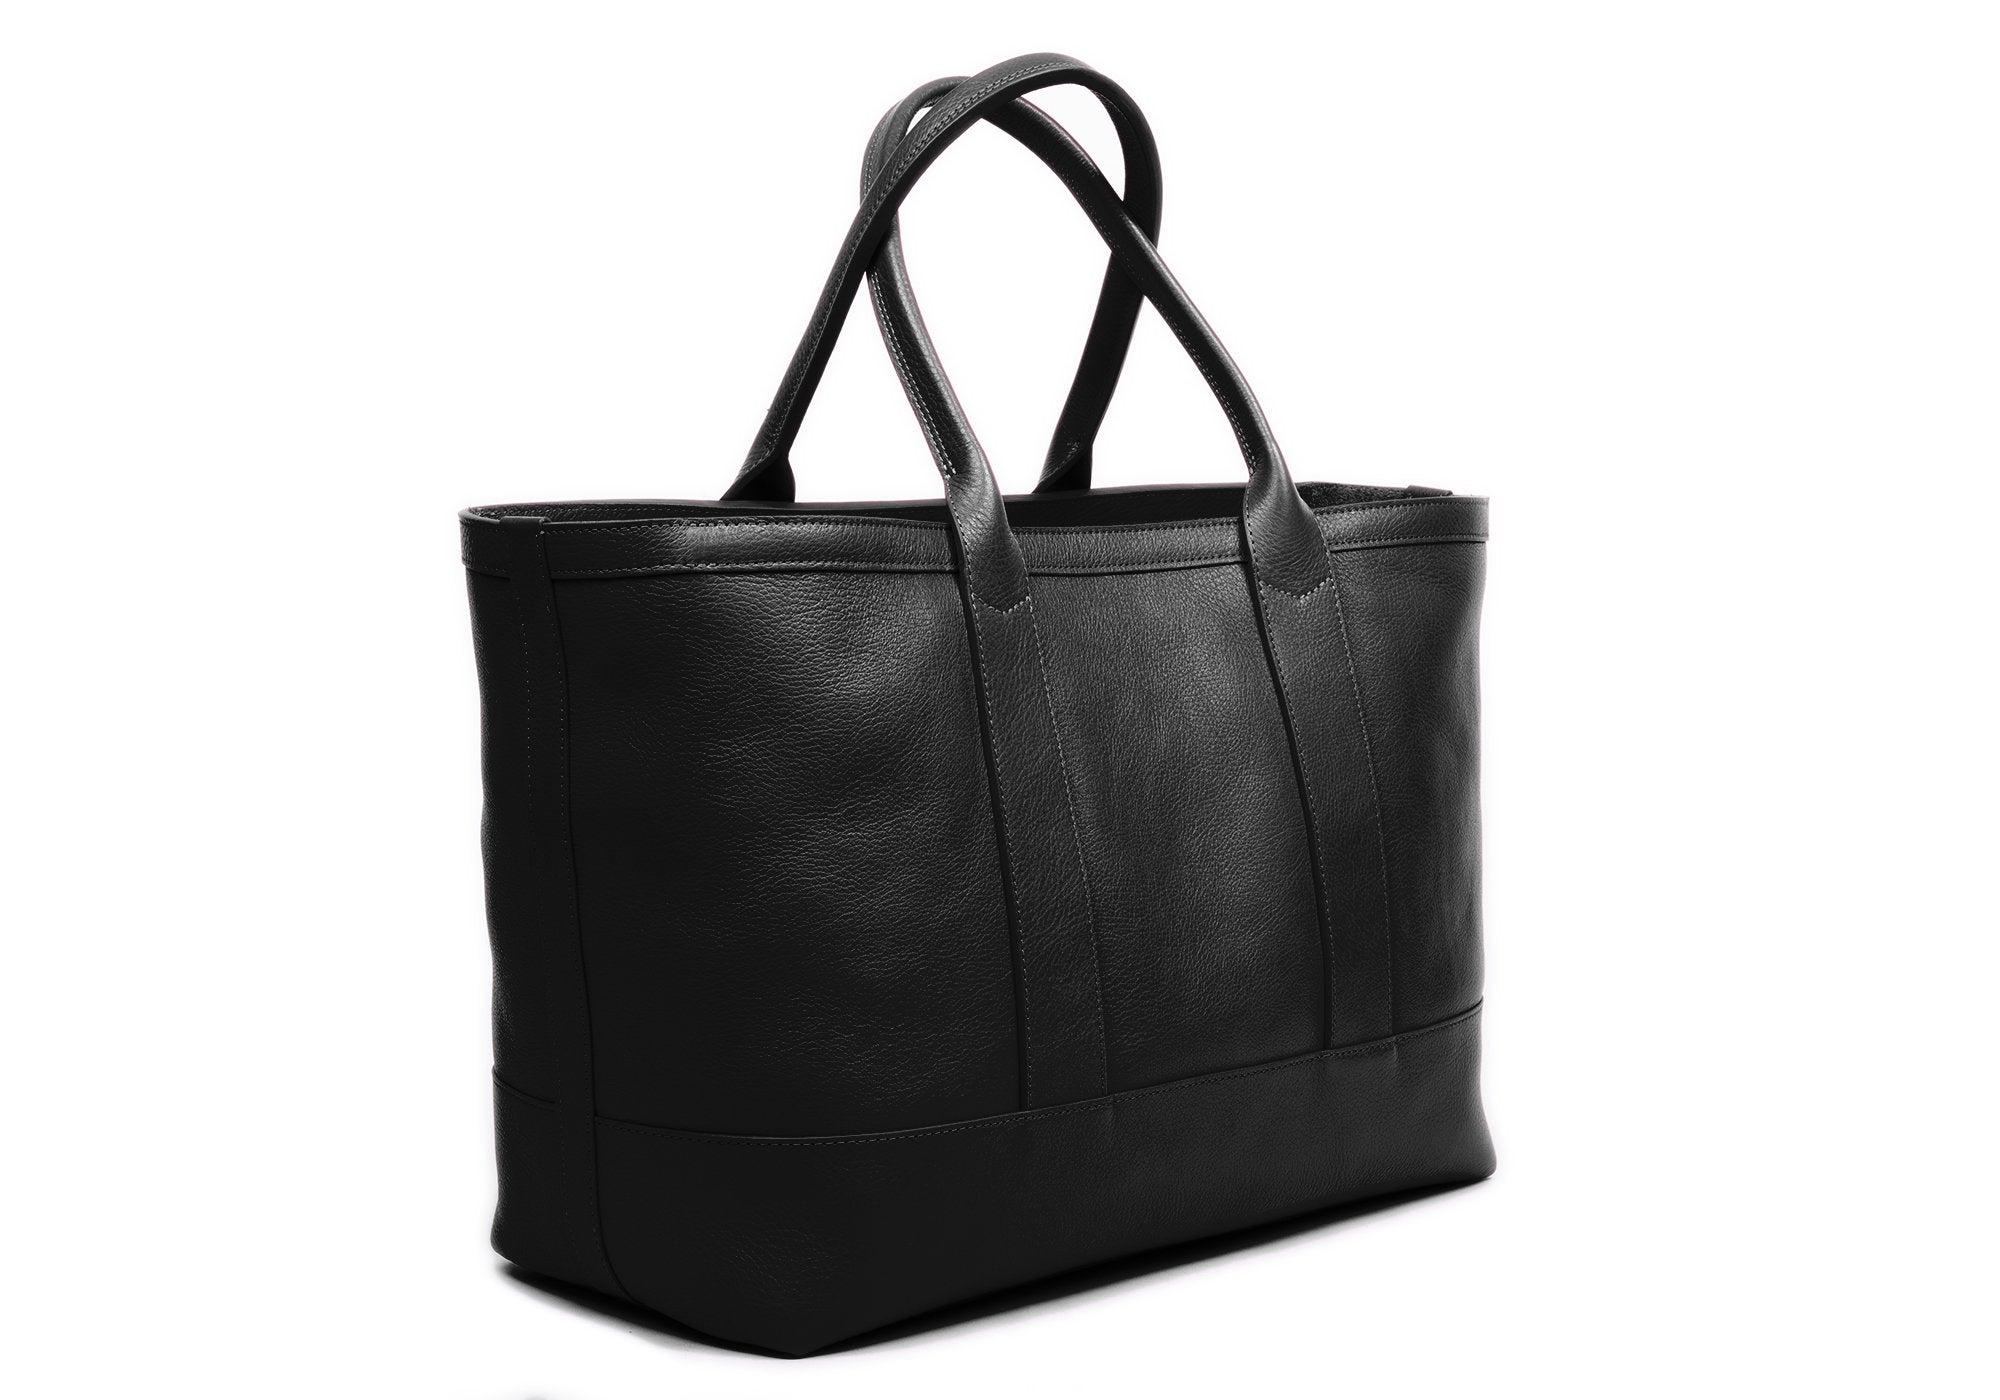 Nolita Tote, Large Leather Tote Bag, Large Laptop Tote, Shoulder Bag, Custom Made by Hand in NYC, Hand Stitched